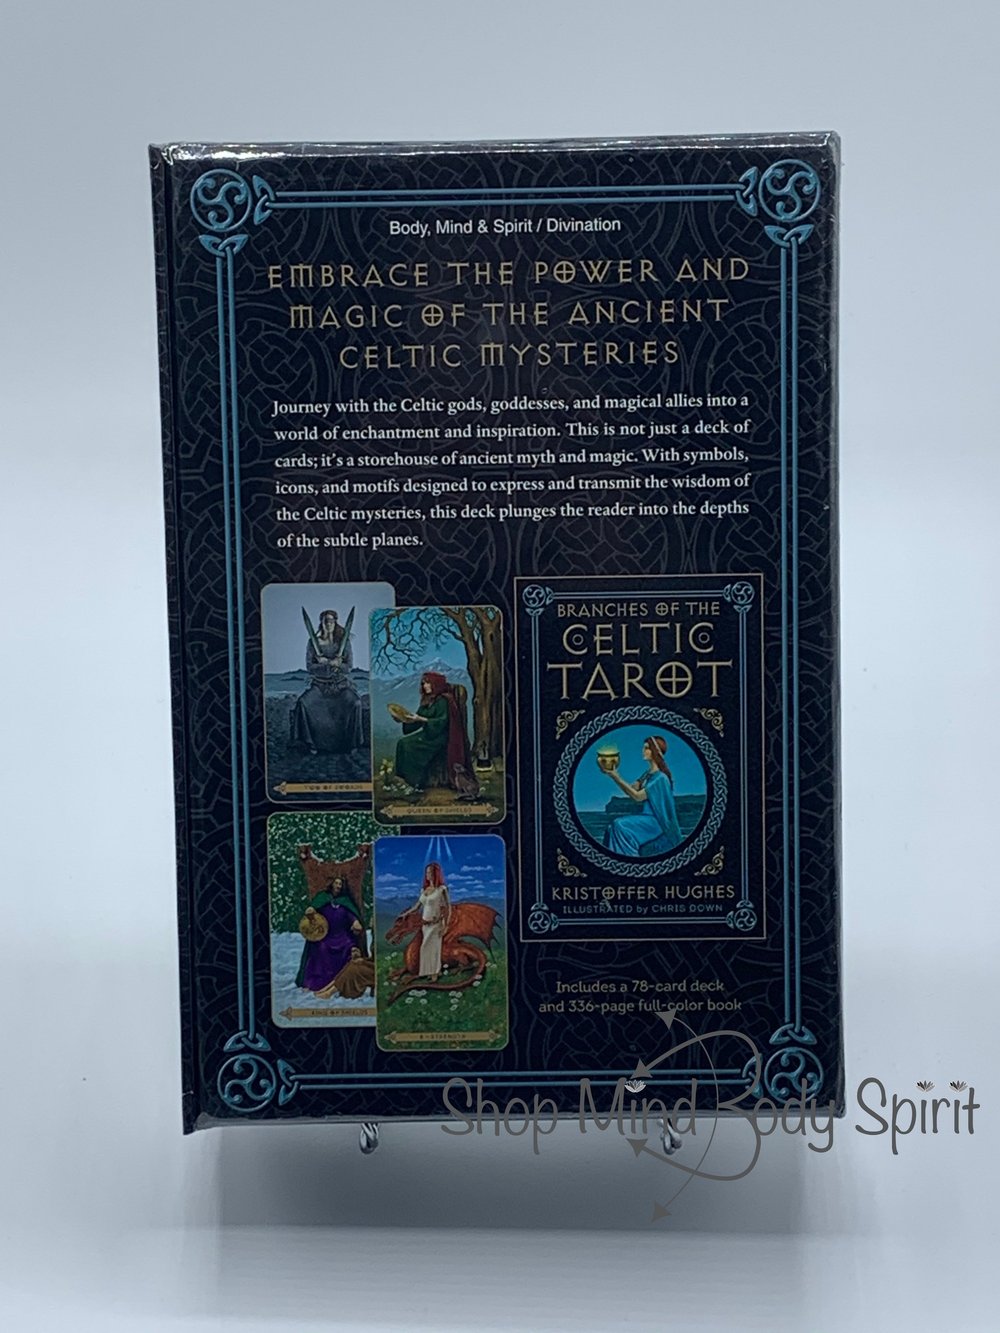 The story of the mystic Celtic shirt